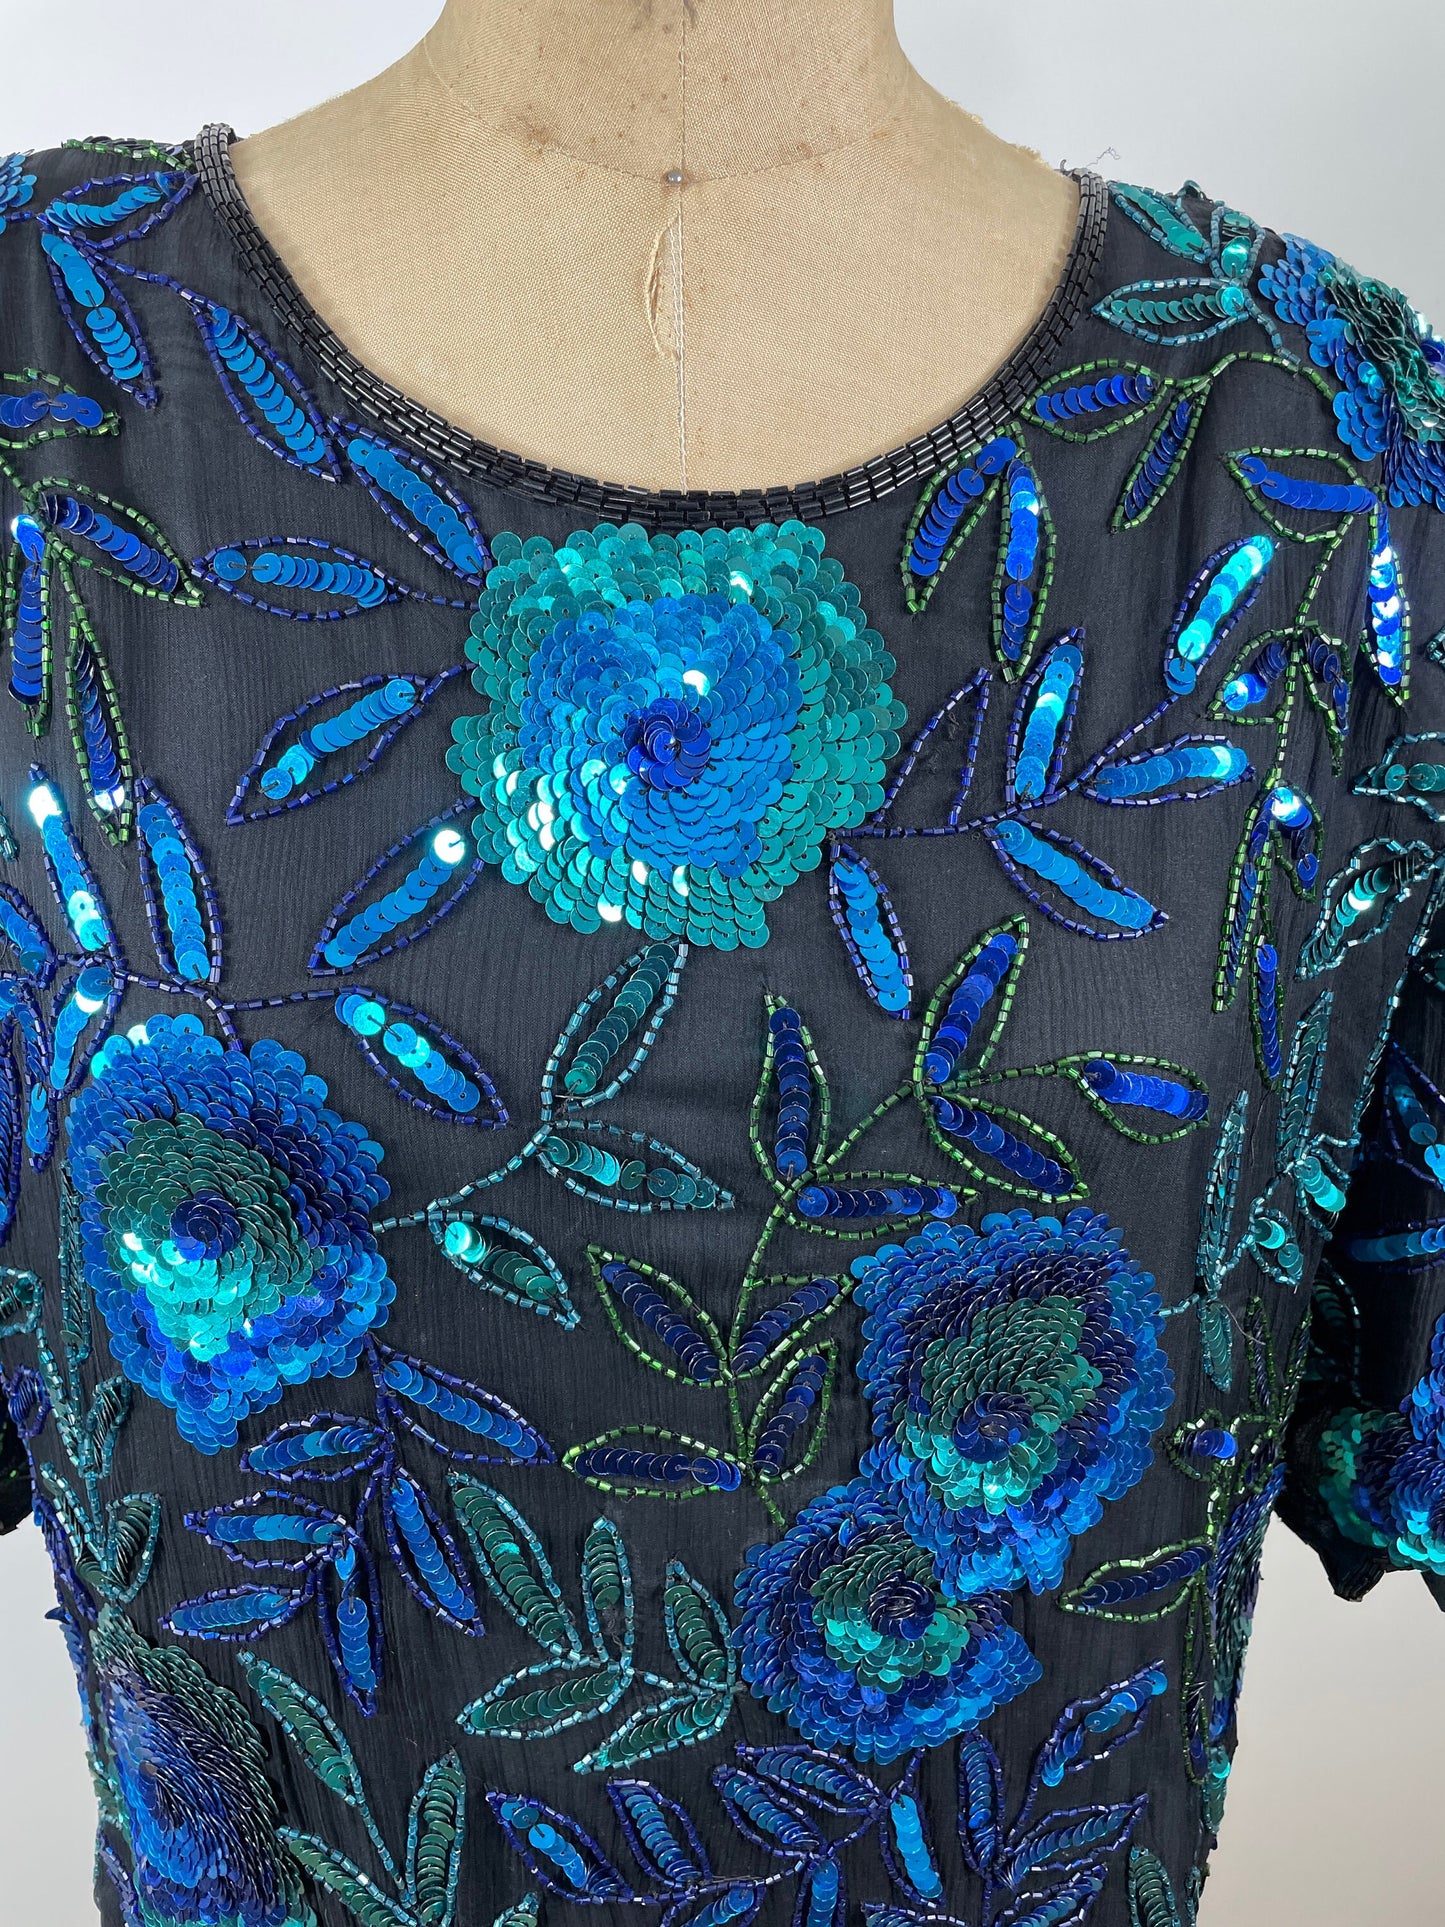 1980s sequin silk top blue teal black Size 2X Plus size by Laurence Kazar